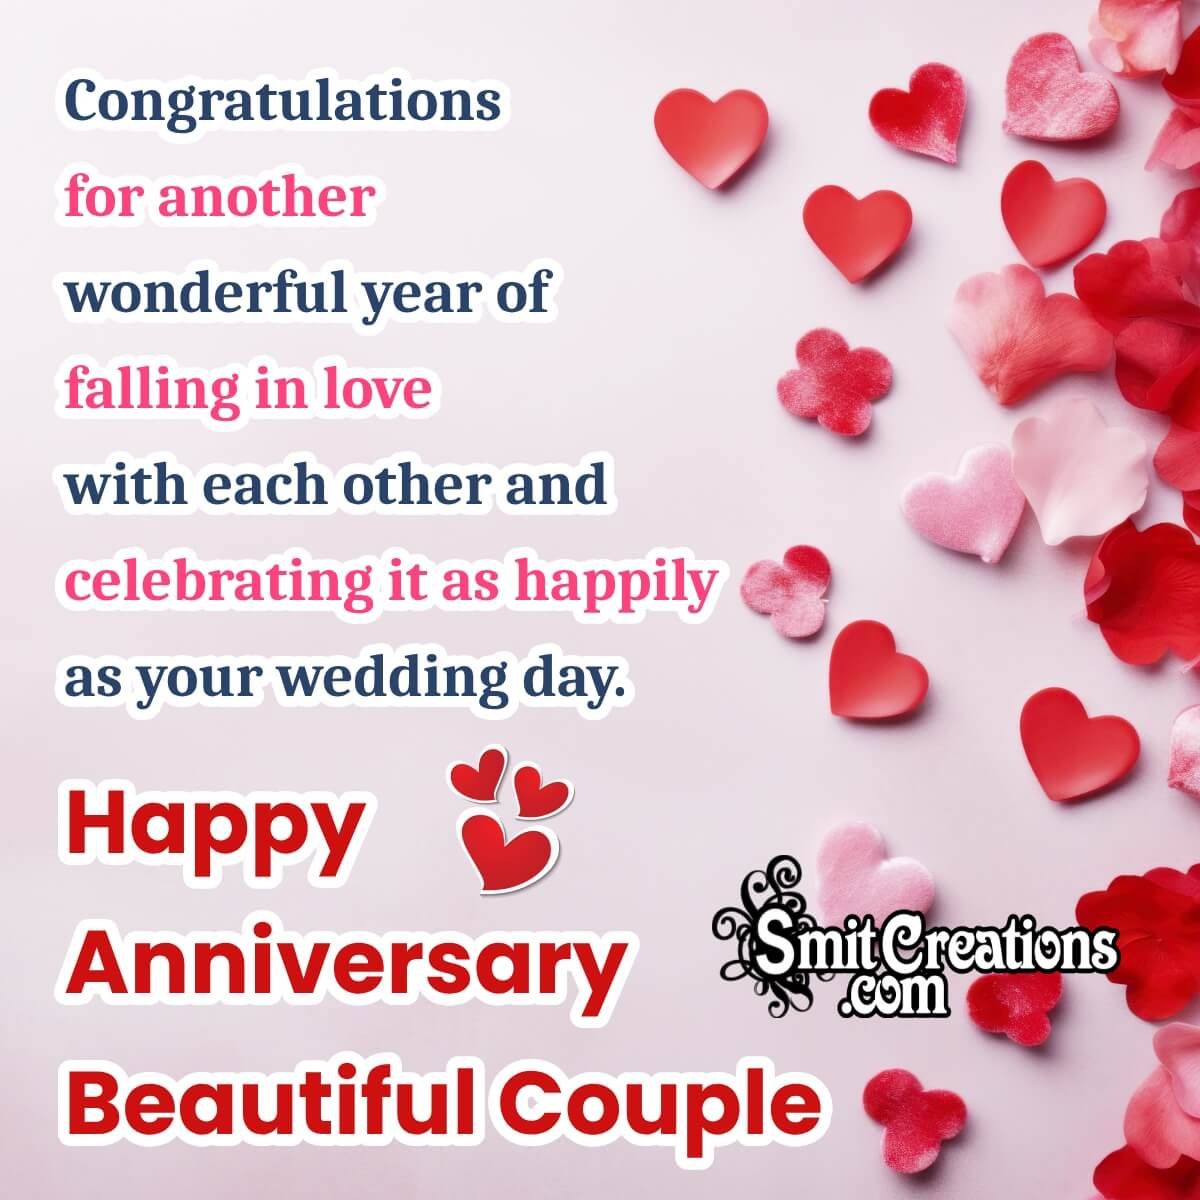 Happy Anniversary Wishes For Couple